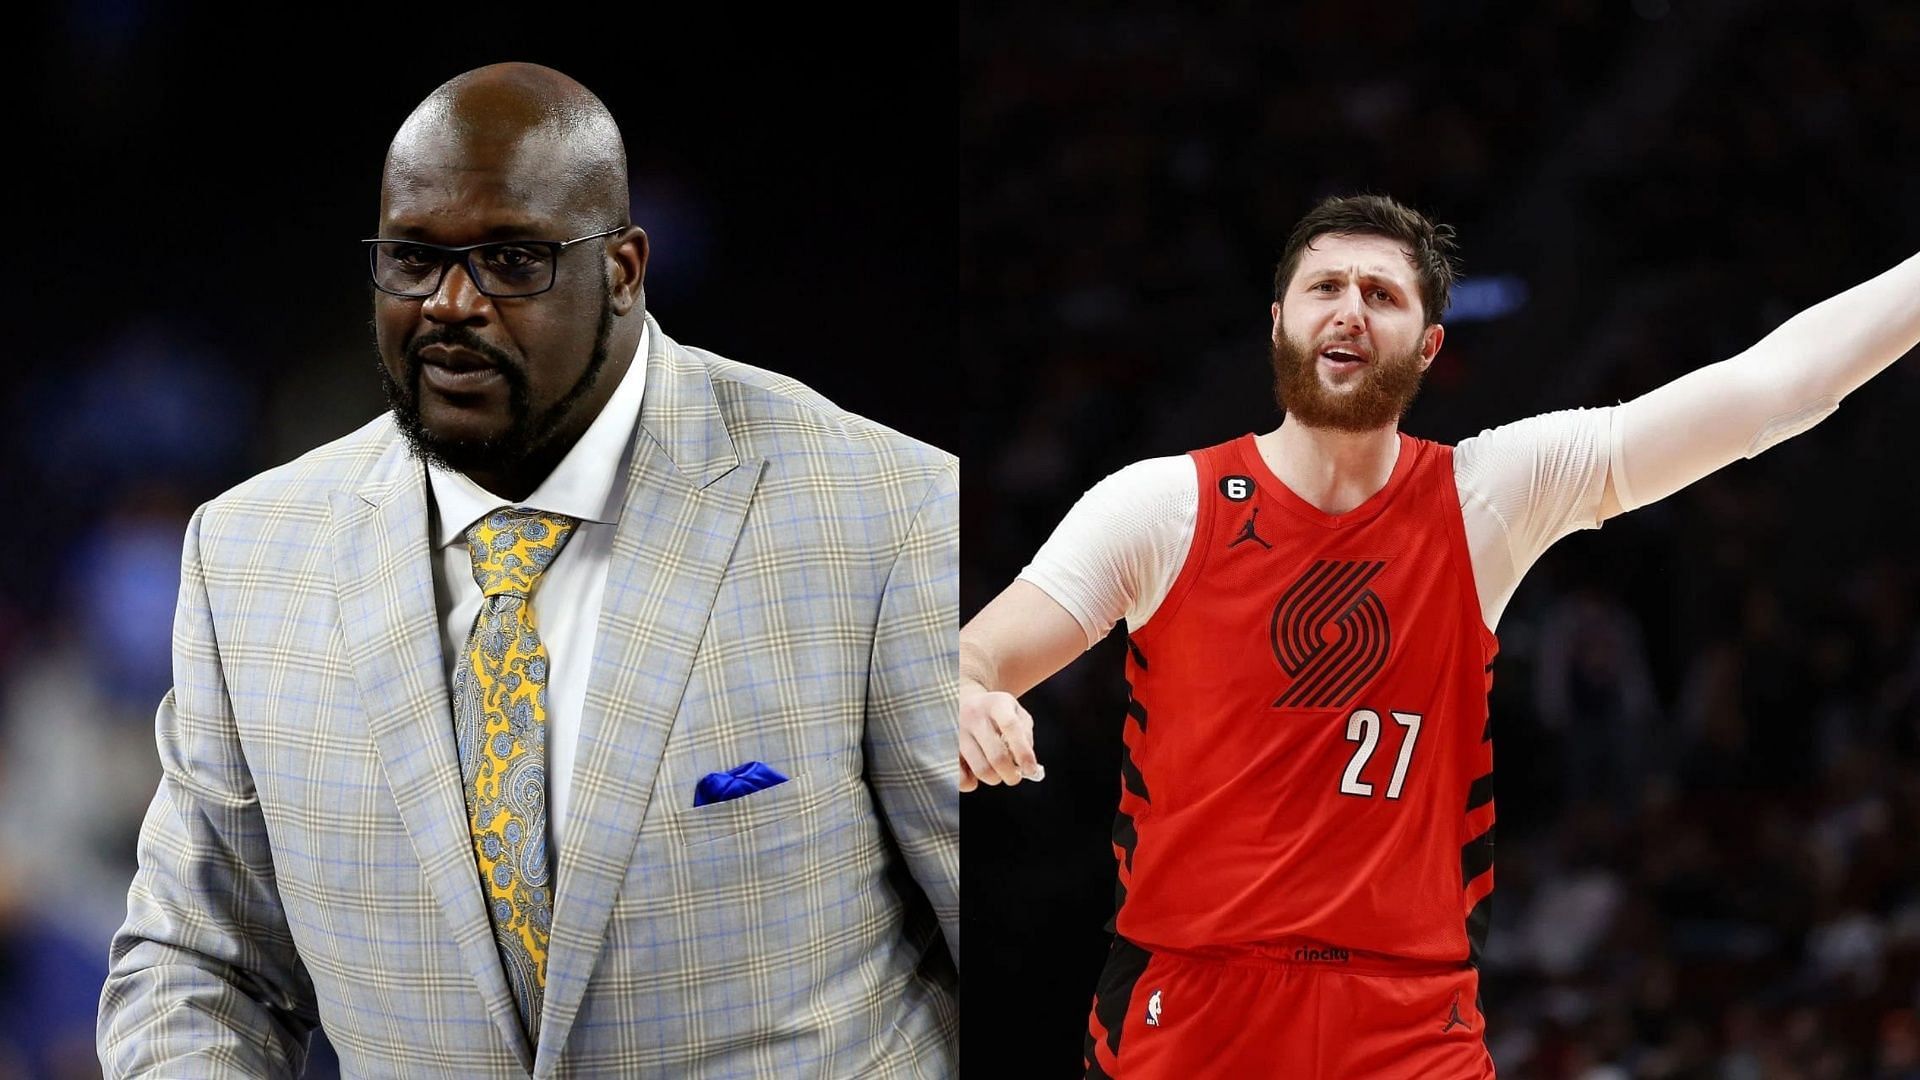 Jusuf Nurkic reacts to Shaquille O